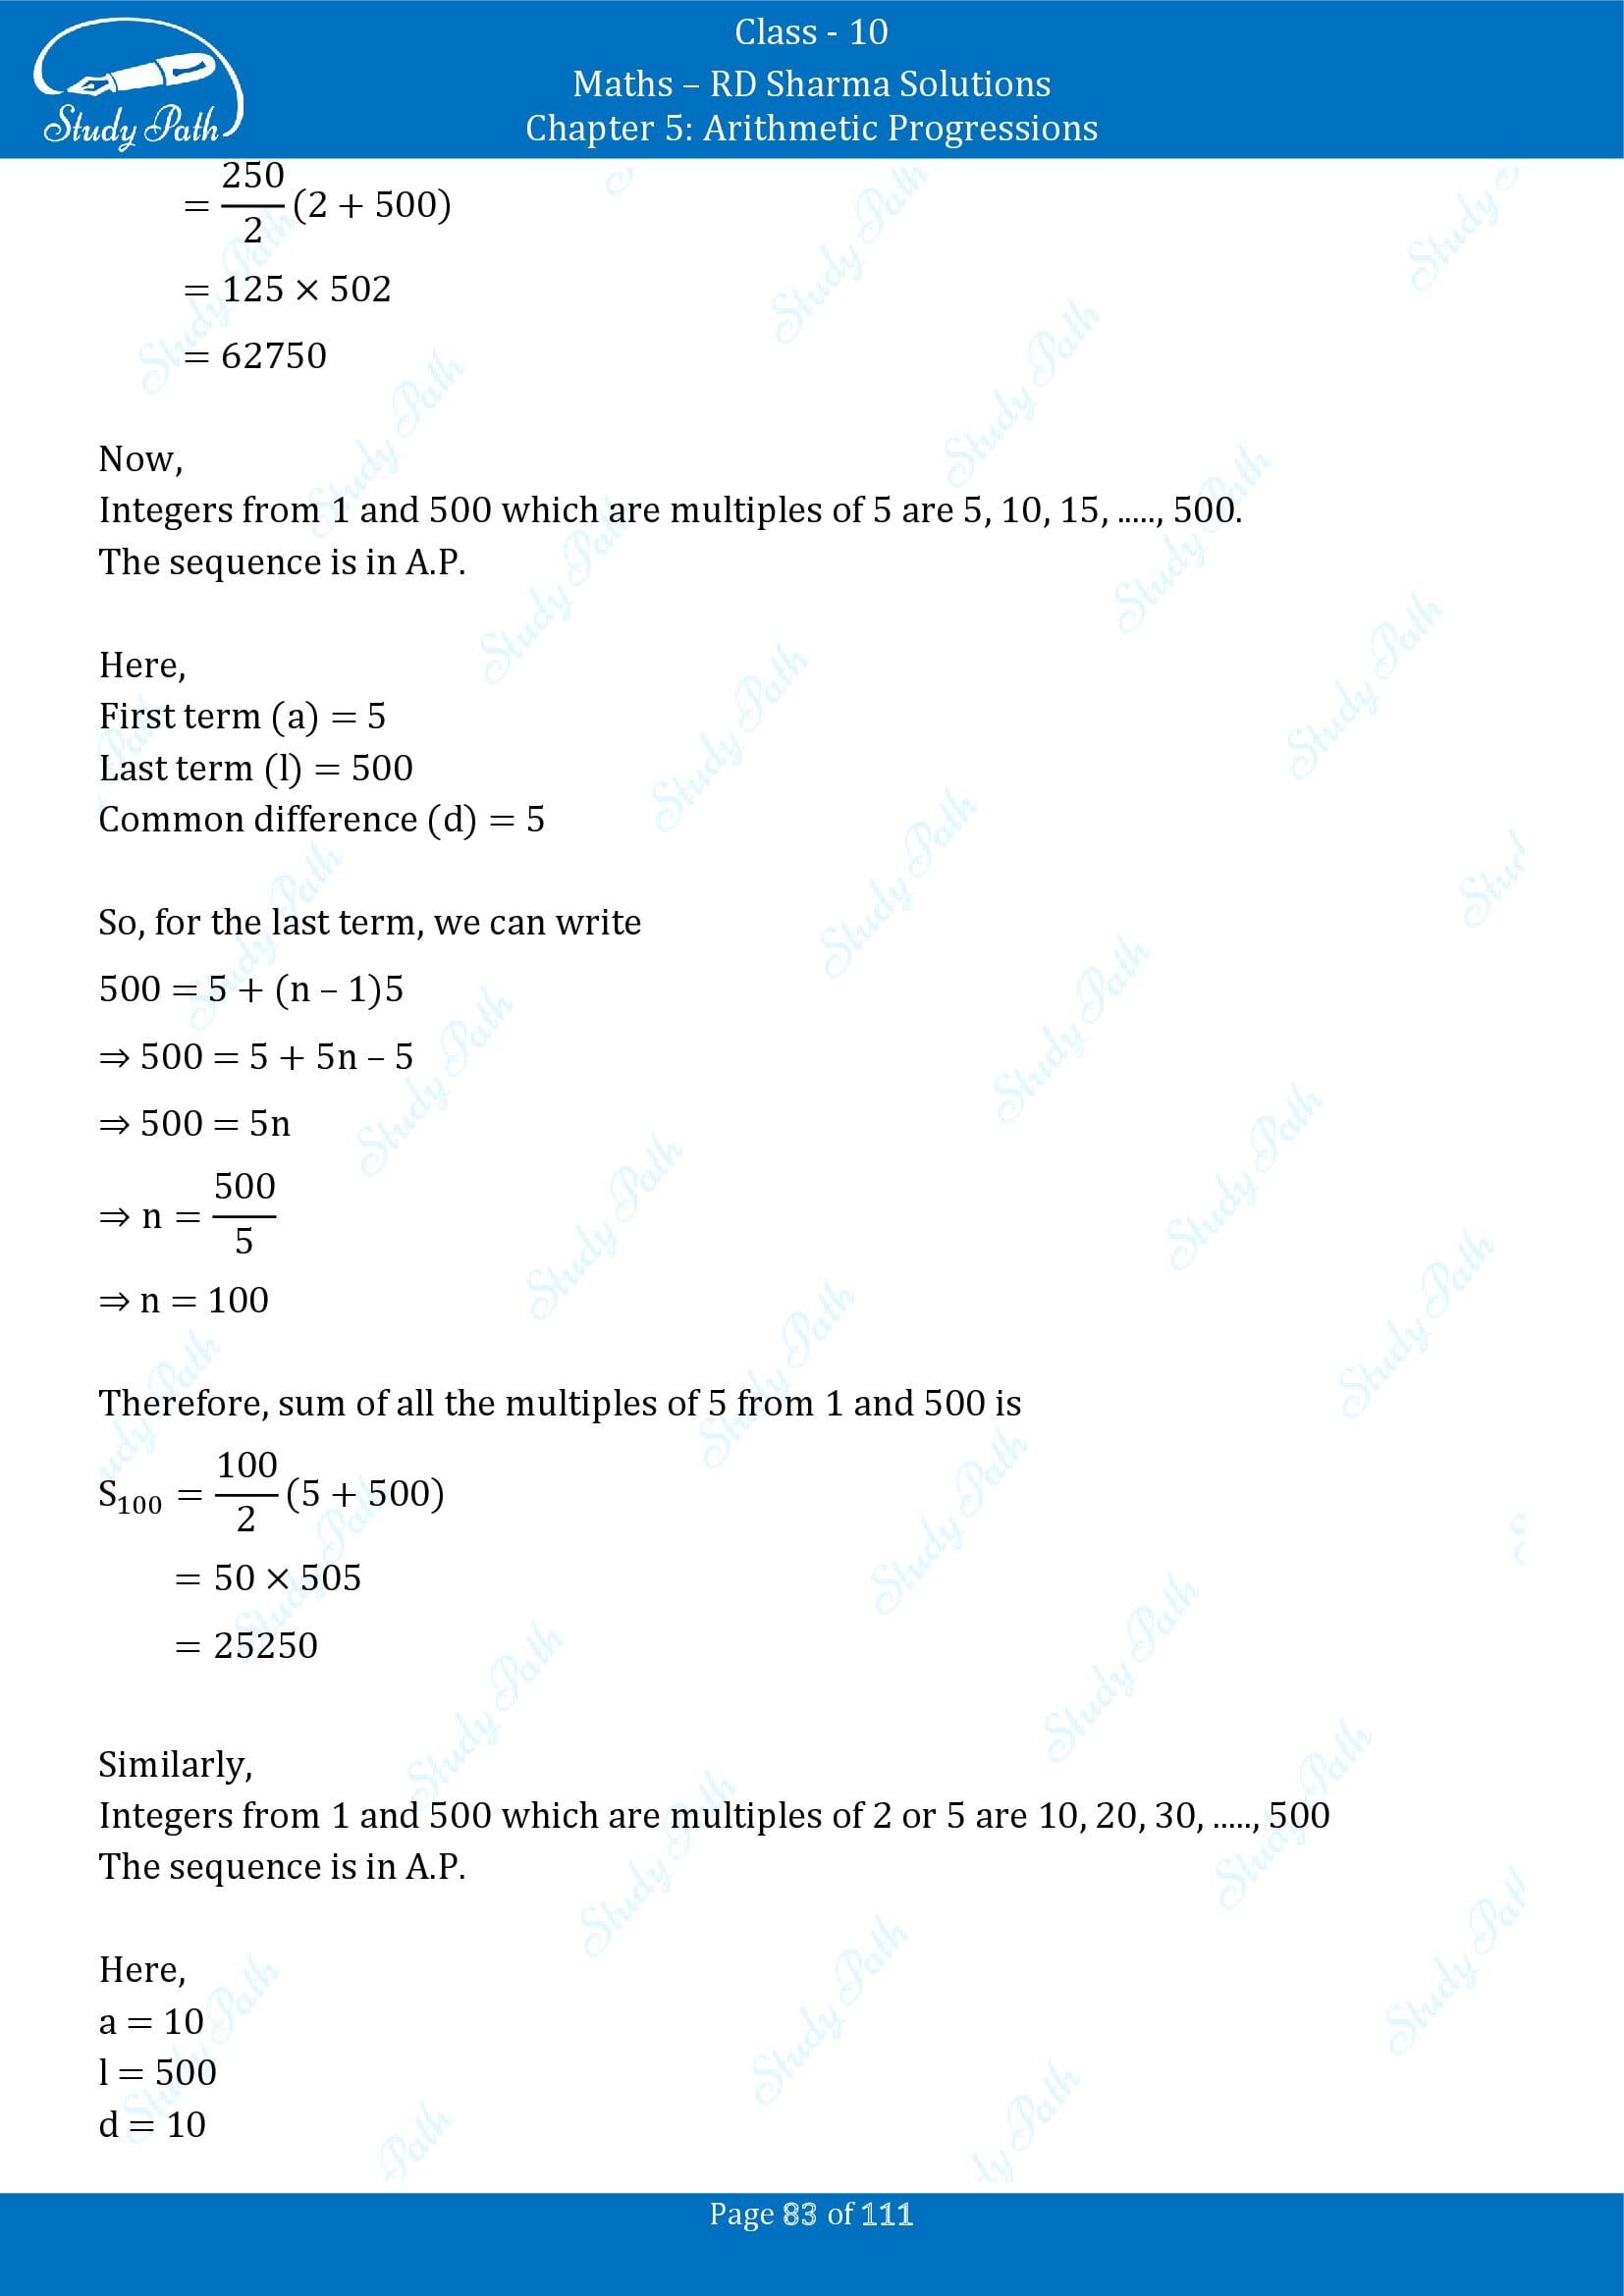 RD Sharma Solutions Class 10 Chapter 5 Arithmetic Progressions Exercise 5.6 00083